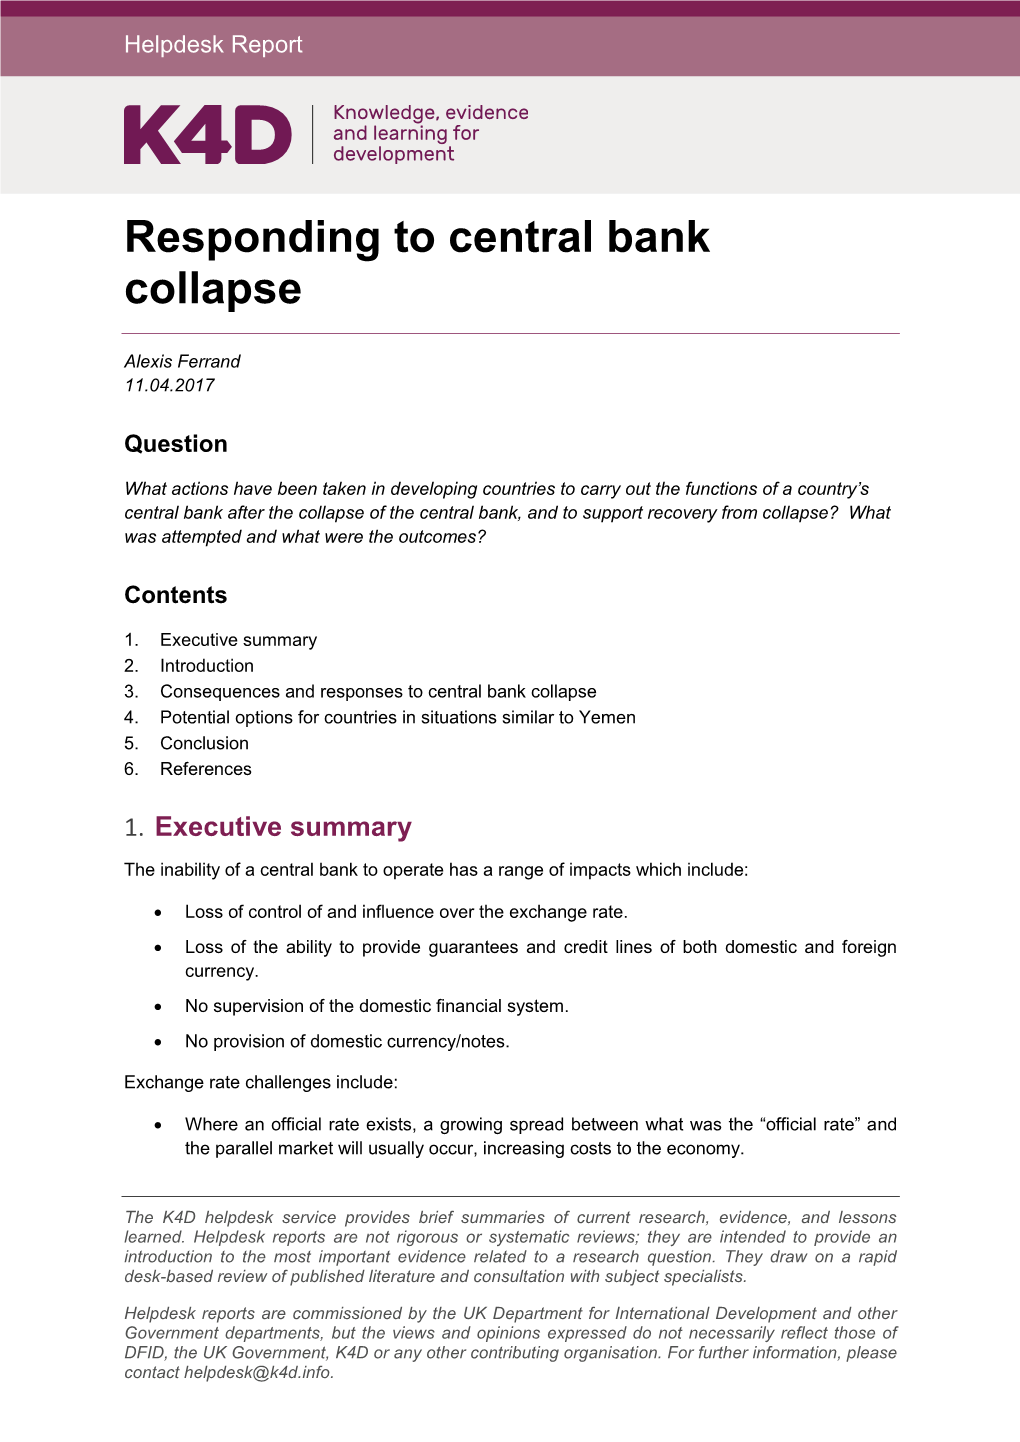 Responding to Central Bank Collapse